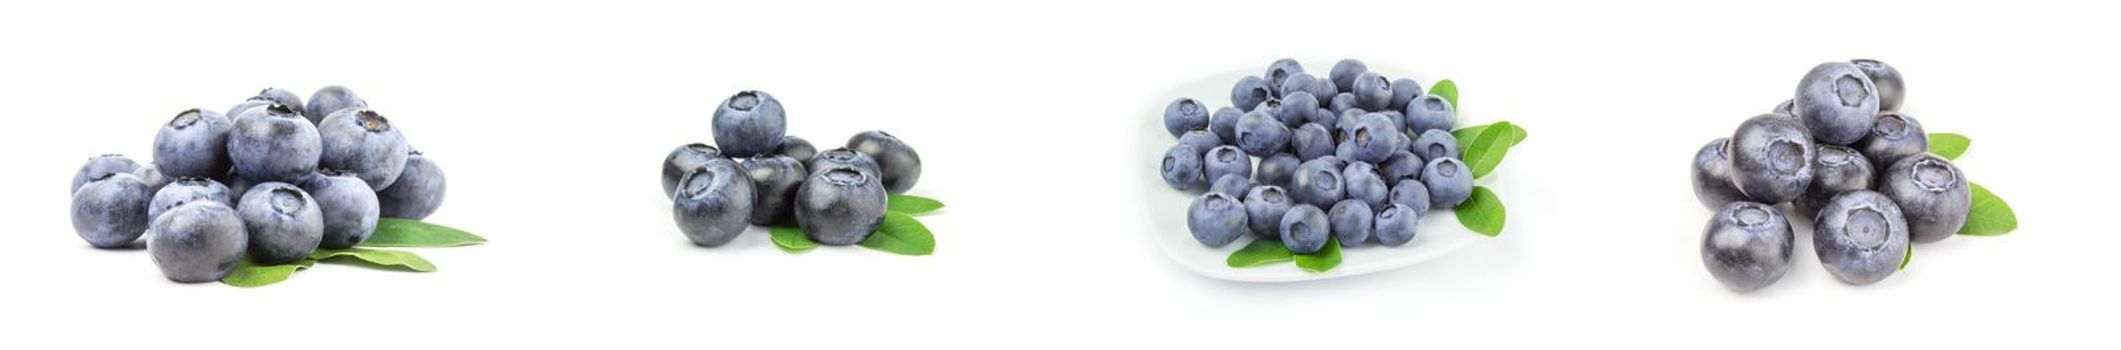 Group of blueberry isolated on a white background cutout